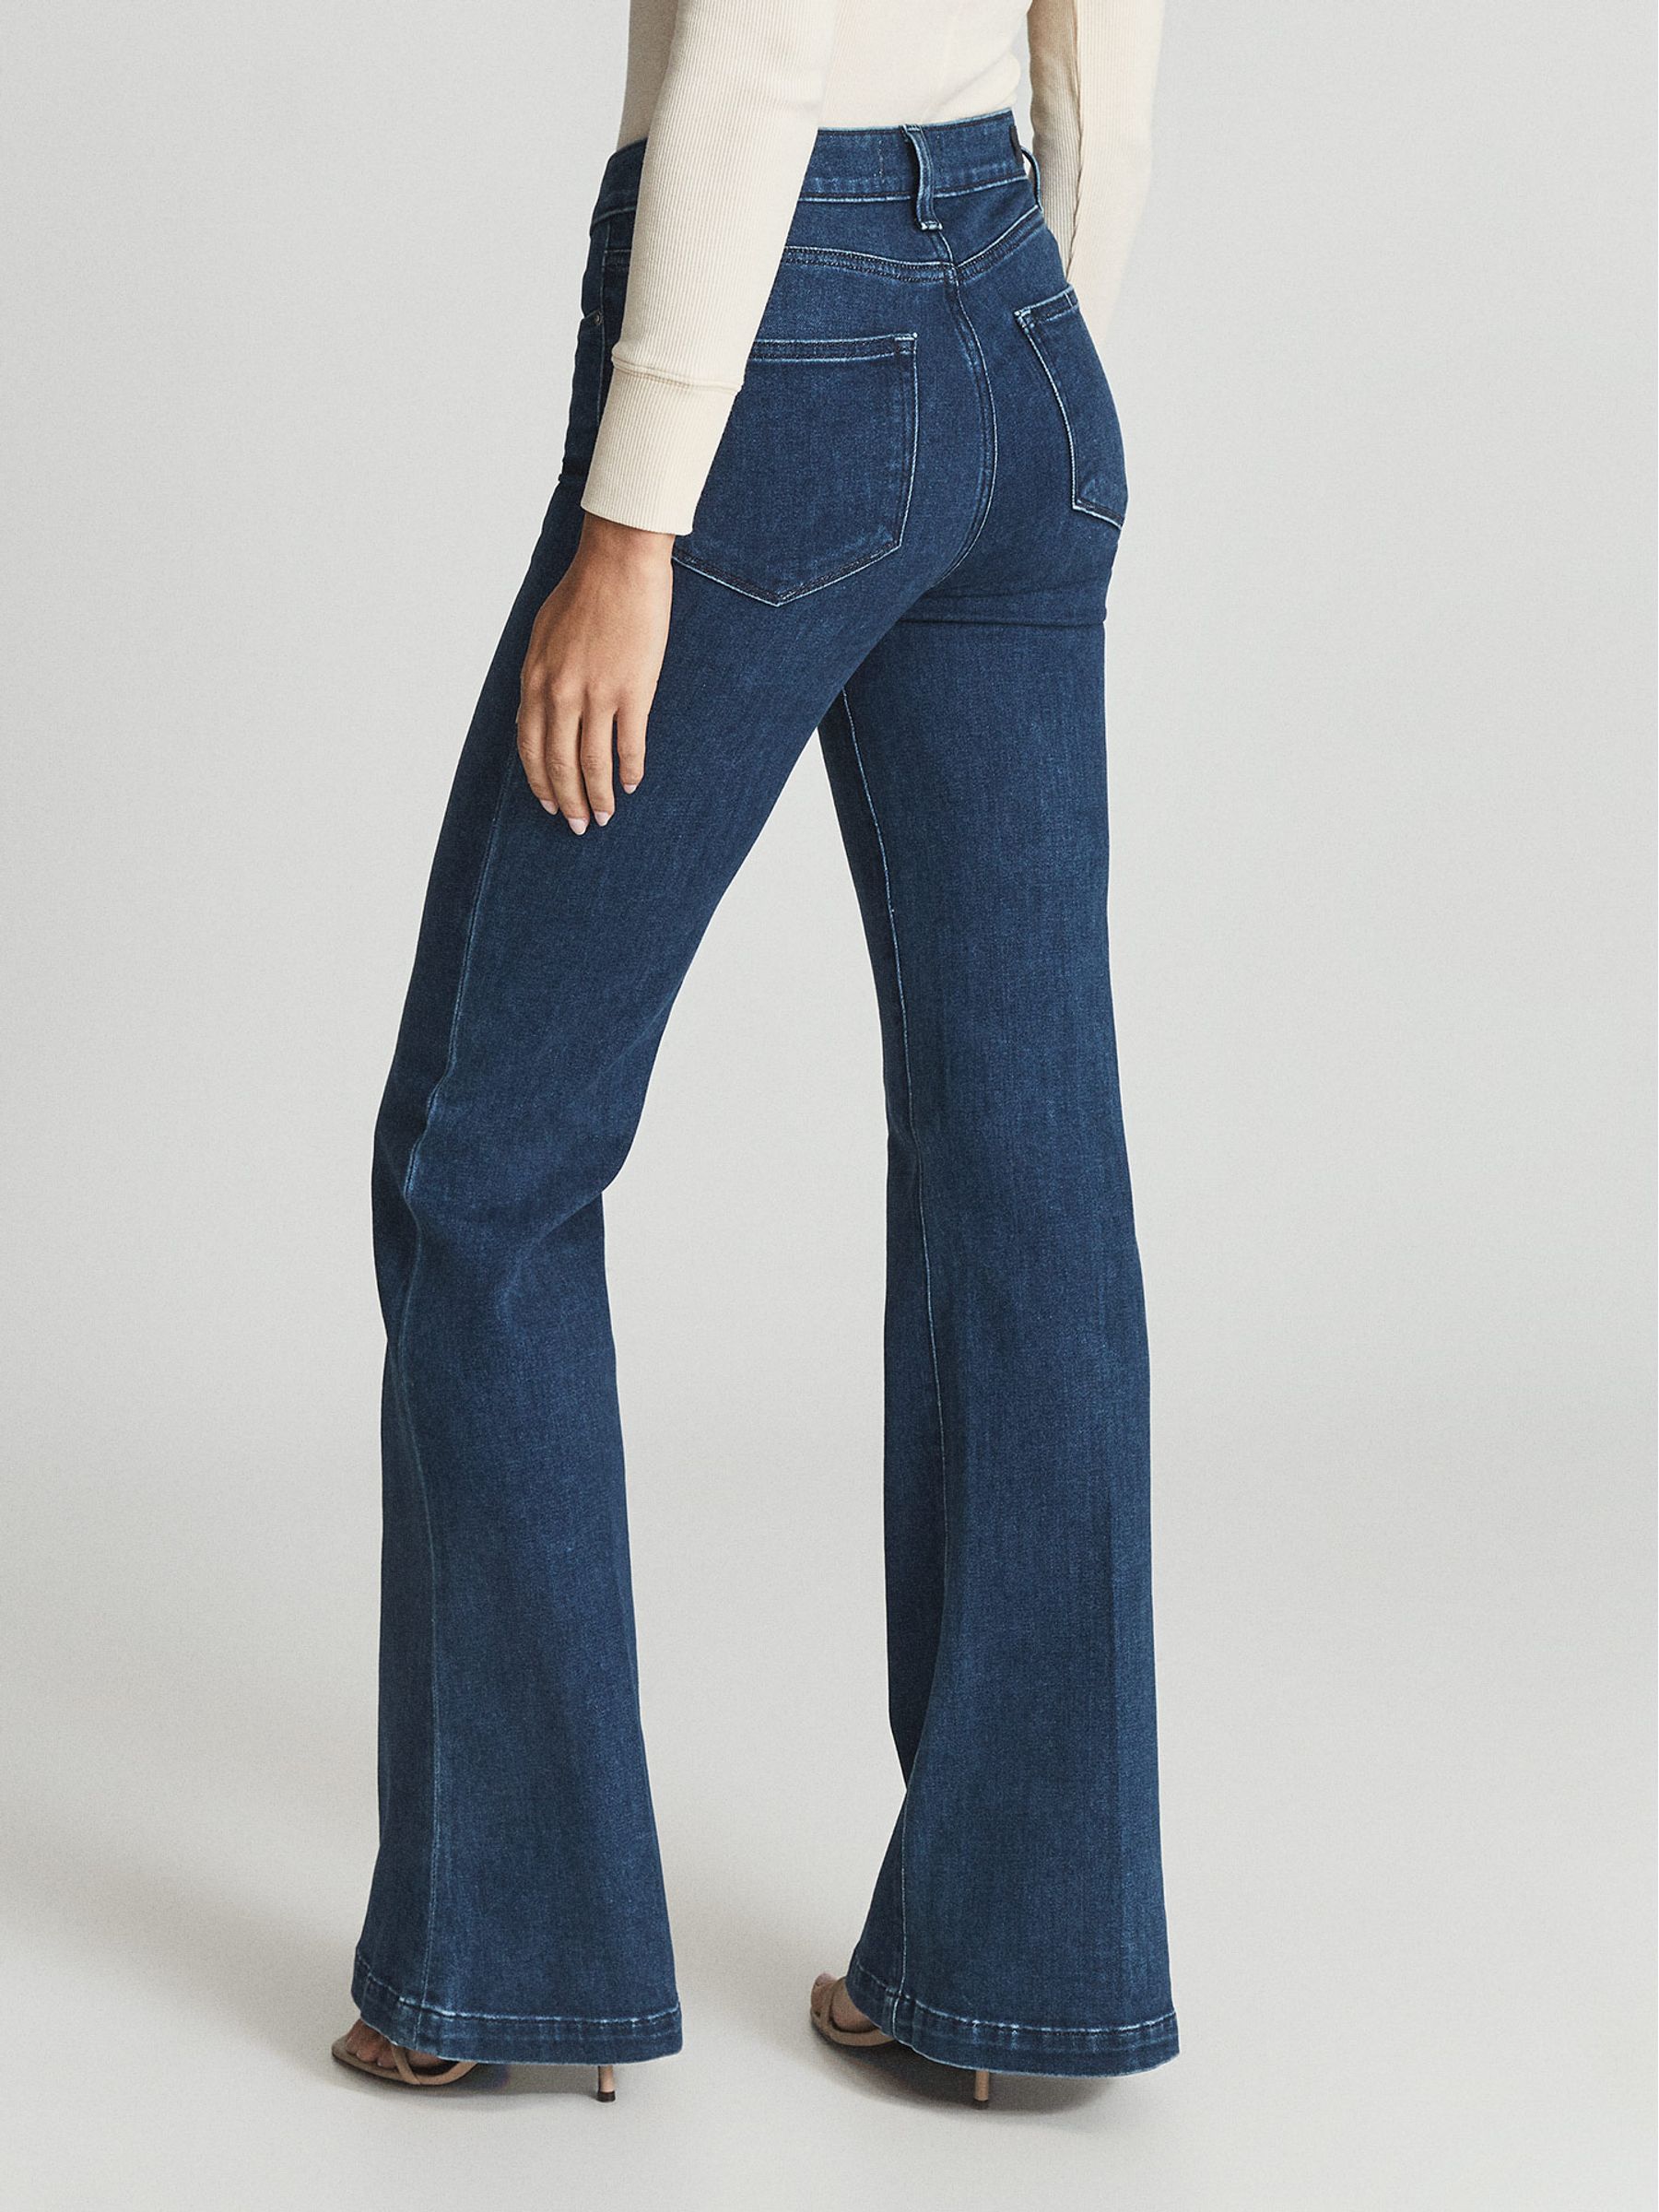 Reiss Genevieve Paige High Rise Flared Jeans - REISS